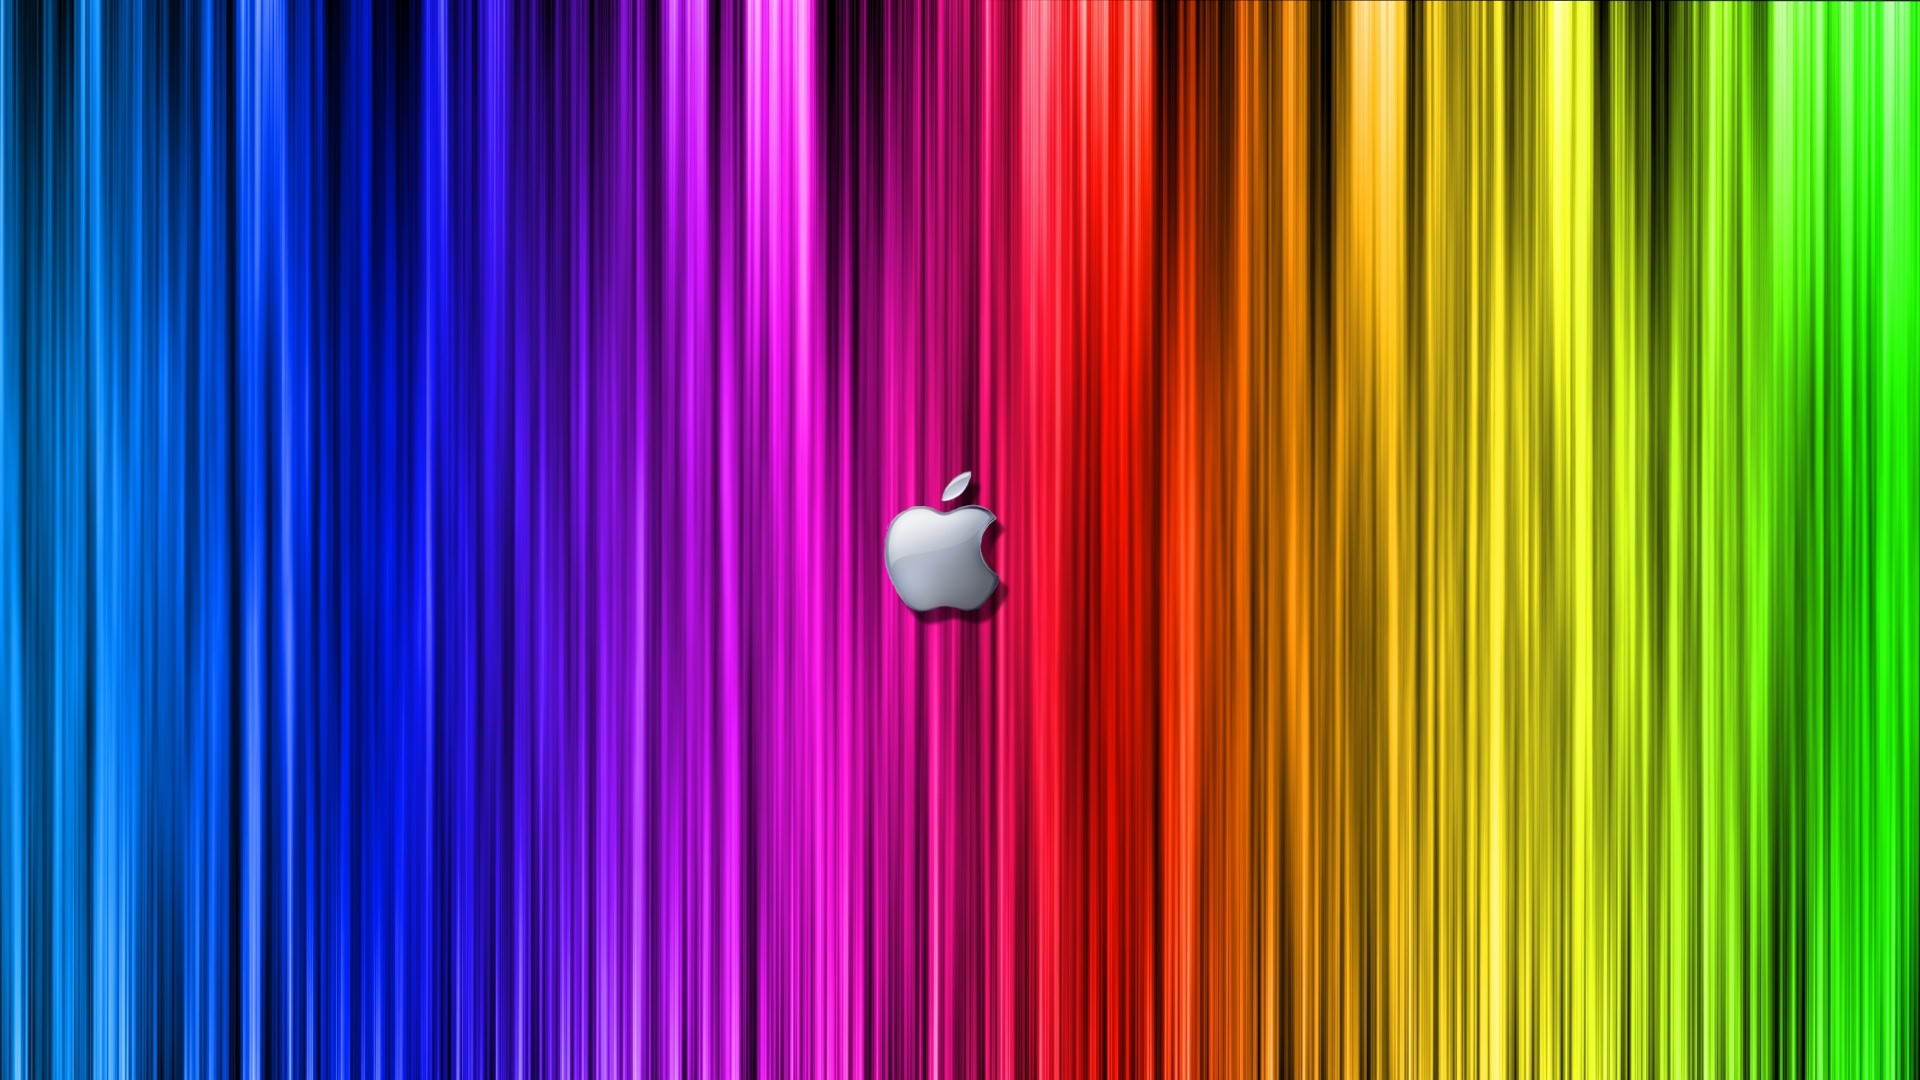 Rainbow Background Wallpaper HD with image resolution 1920x1080 pixel. You can make this wallpaper for your Desktop Computer Backgrounds, Mac Wallpapers, Android Lock screen or iPhone Screensavers